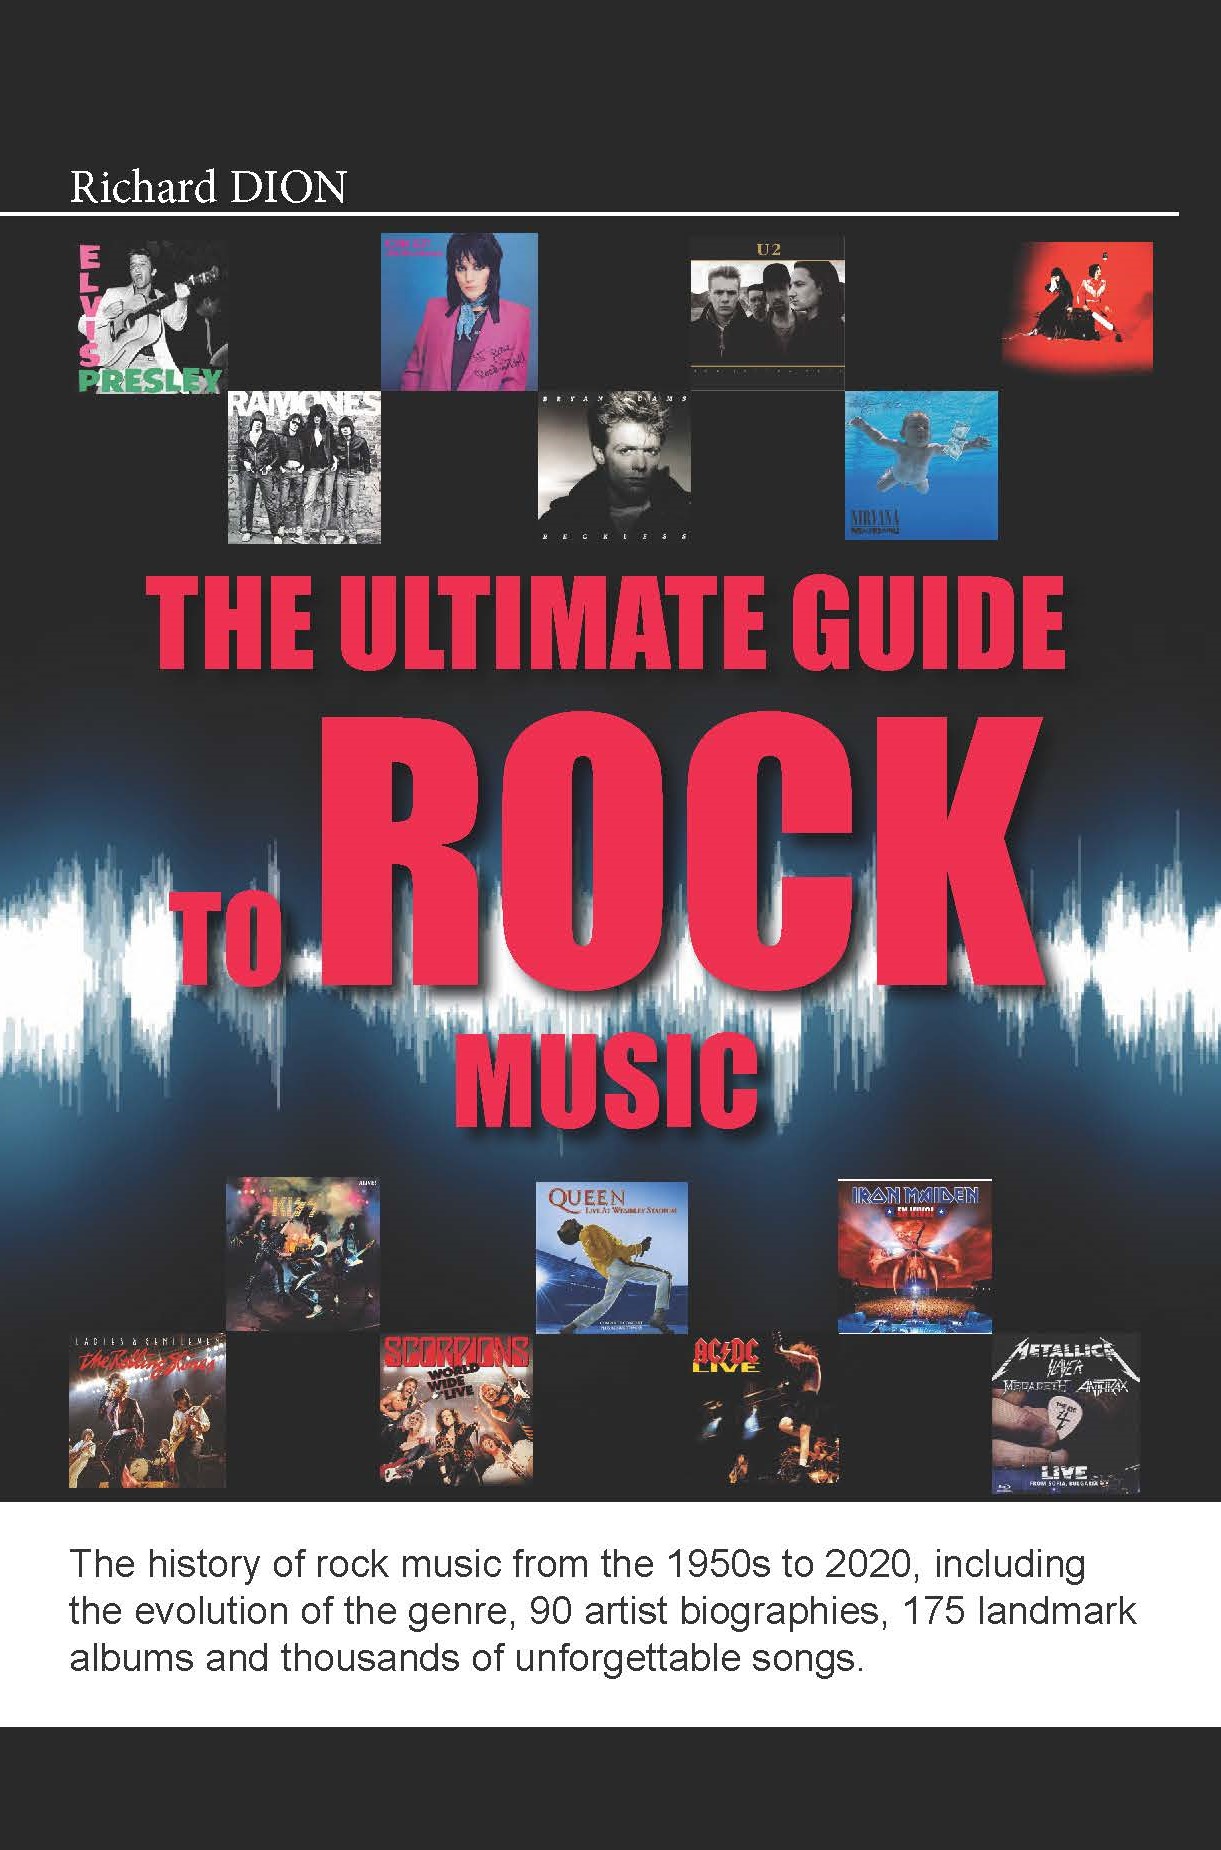 Richard Dion - The Ultimate Guide to ROCK Music